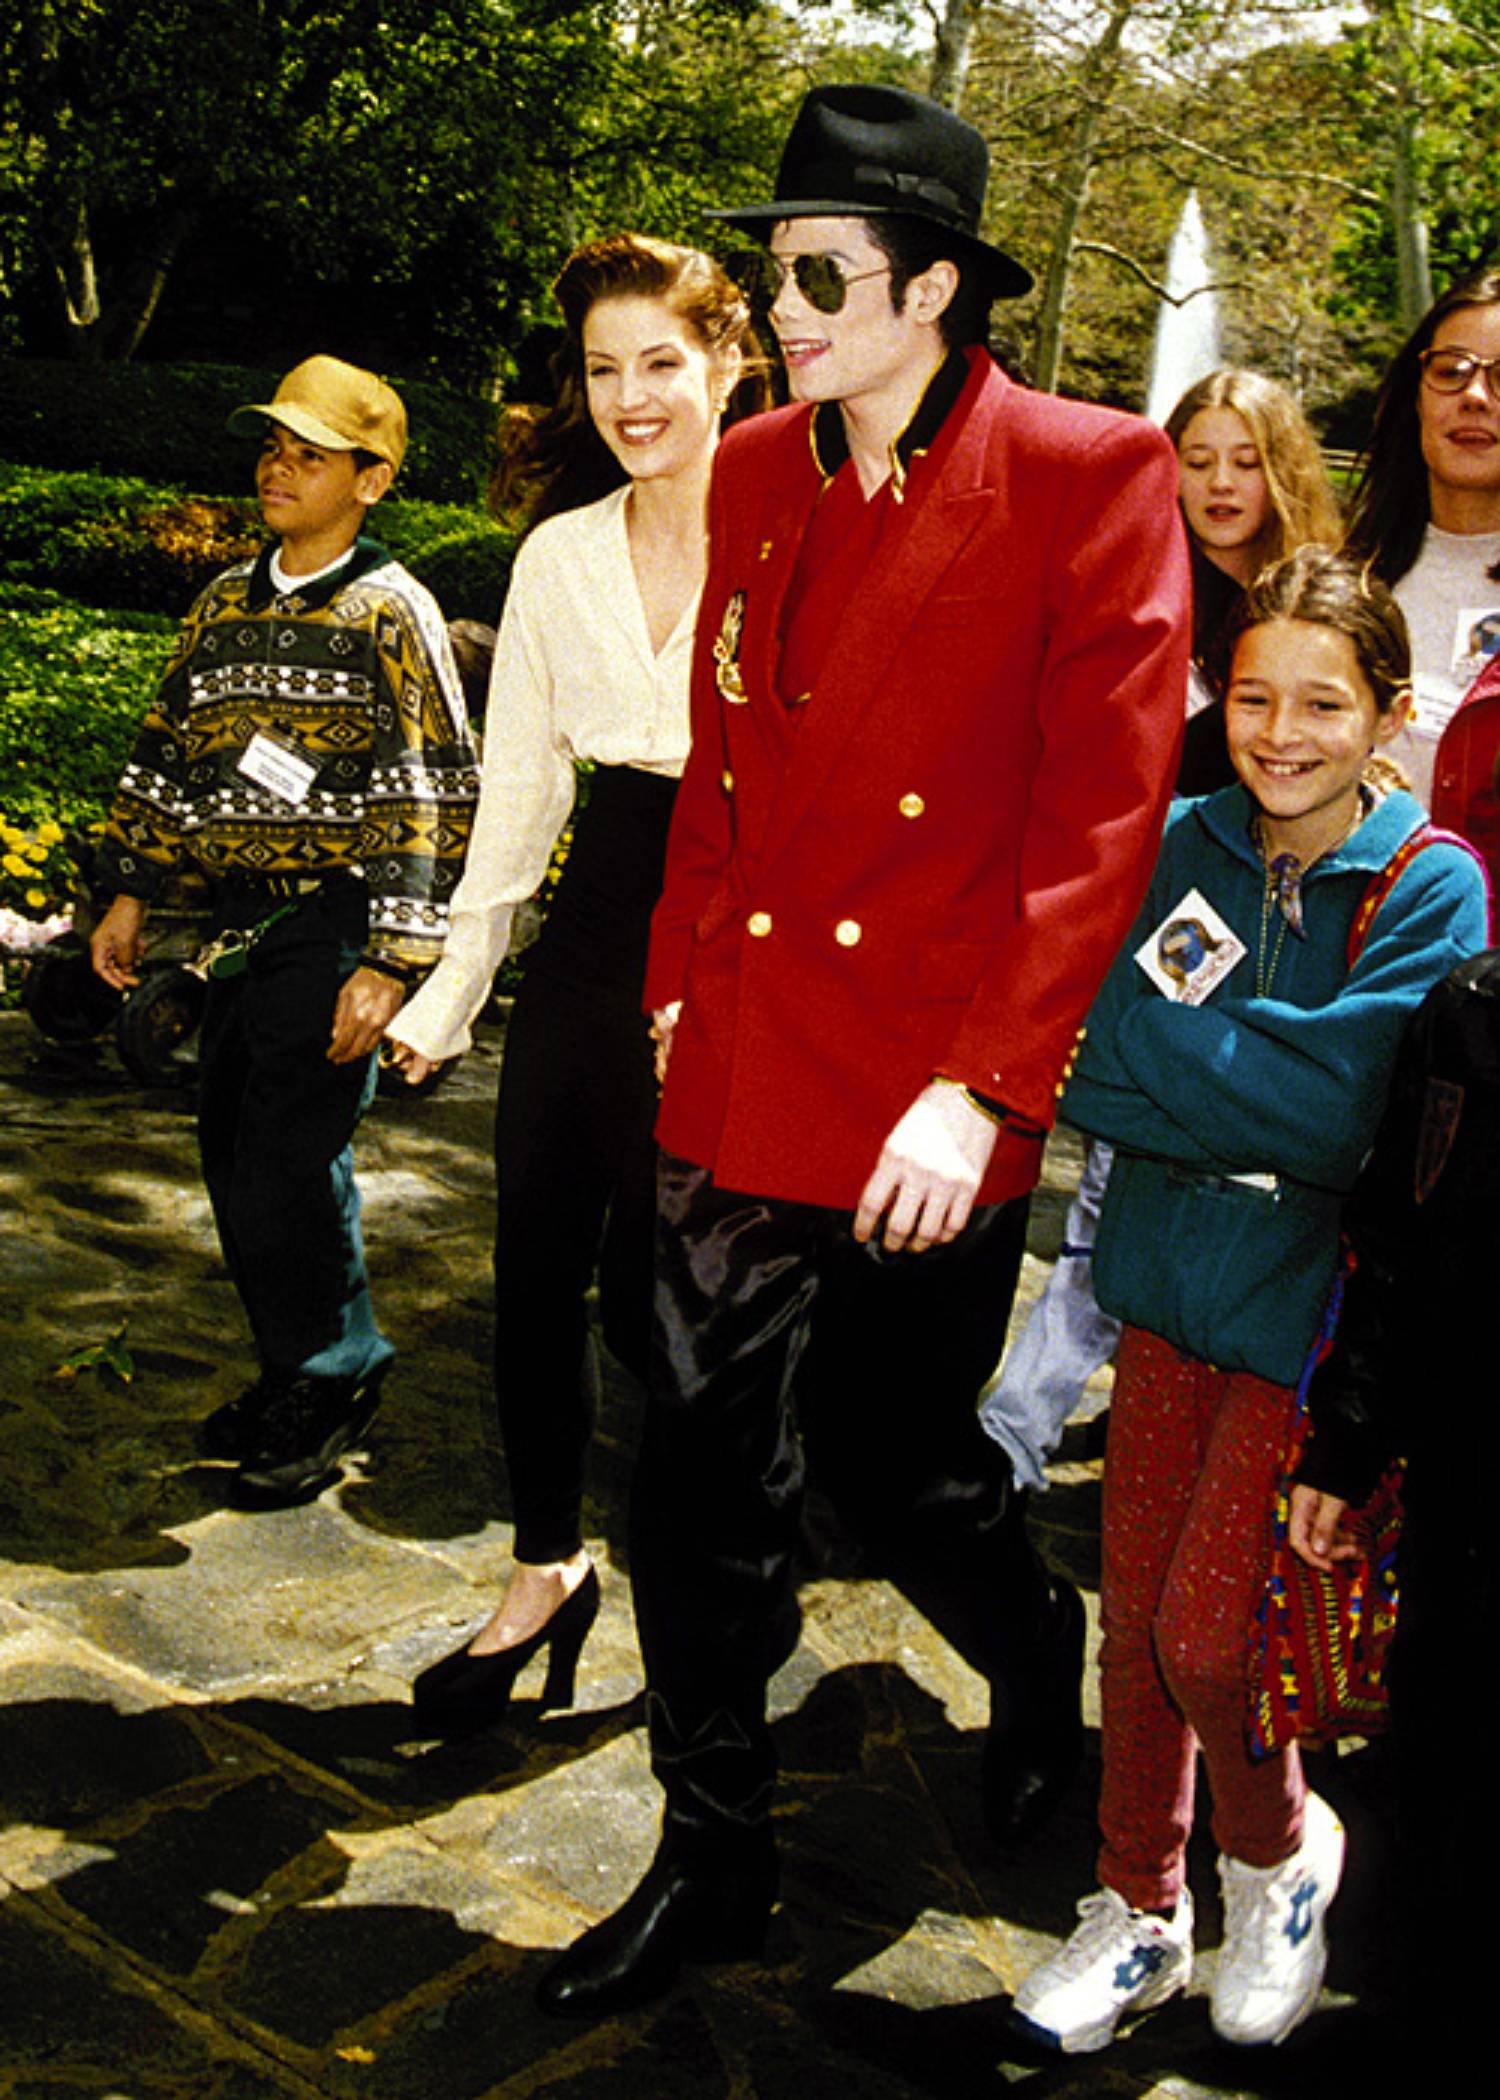 Michael Jackson & Lisa Marie Presley attending a children's charity event in Los Angeles April 1995 